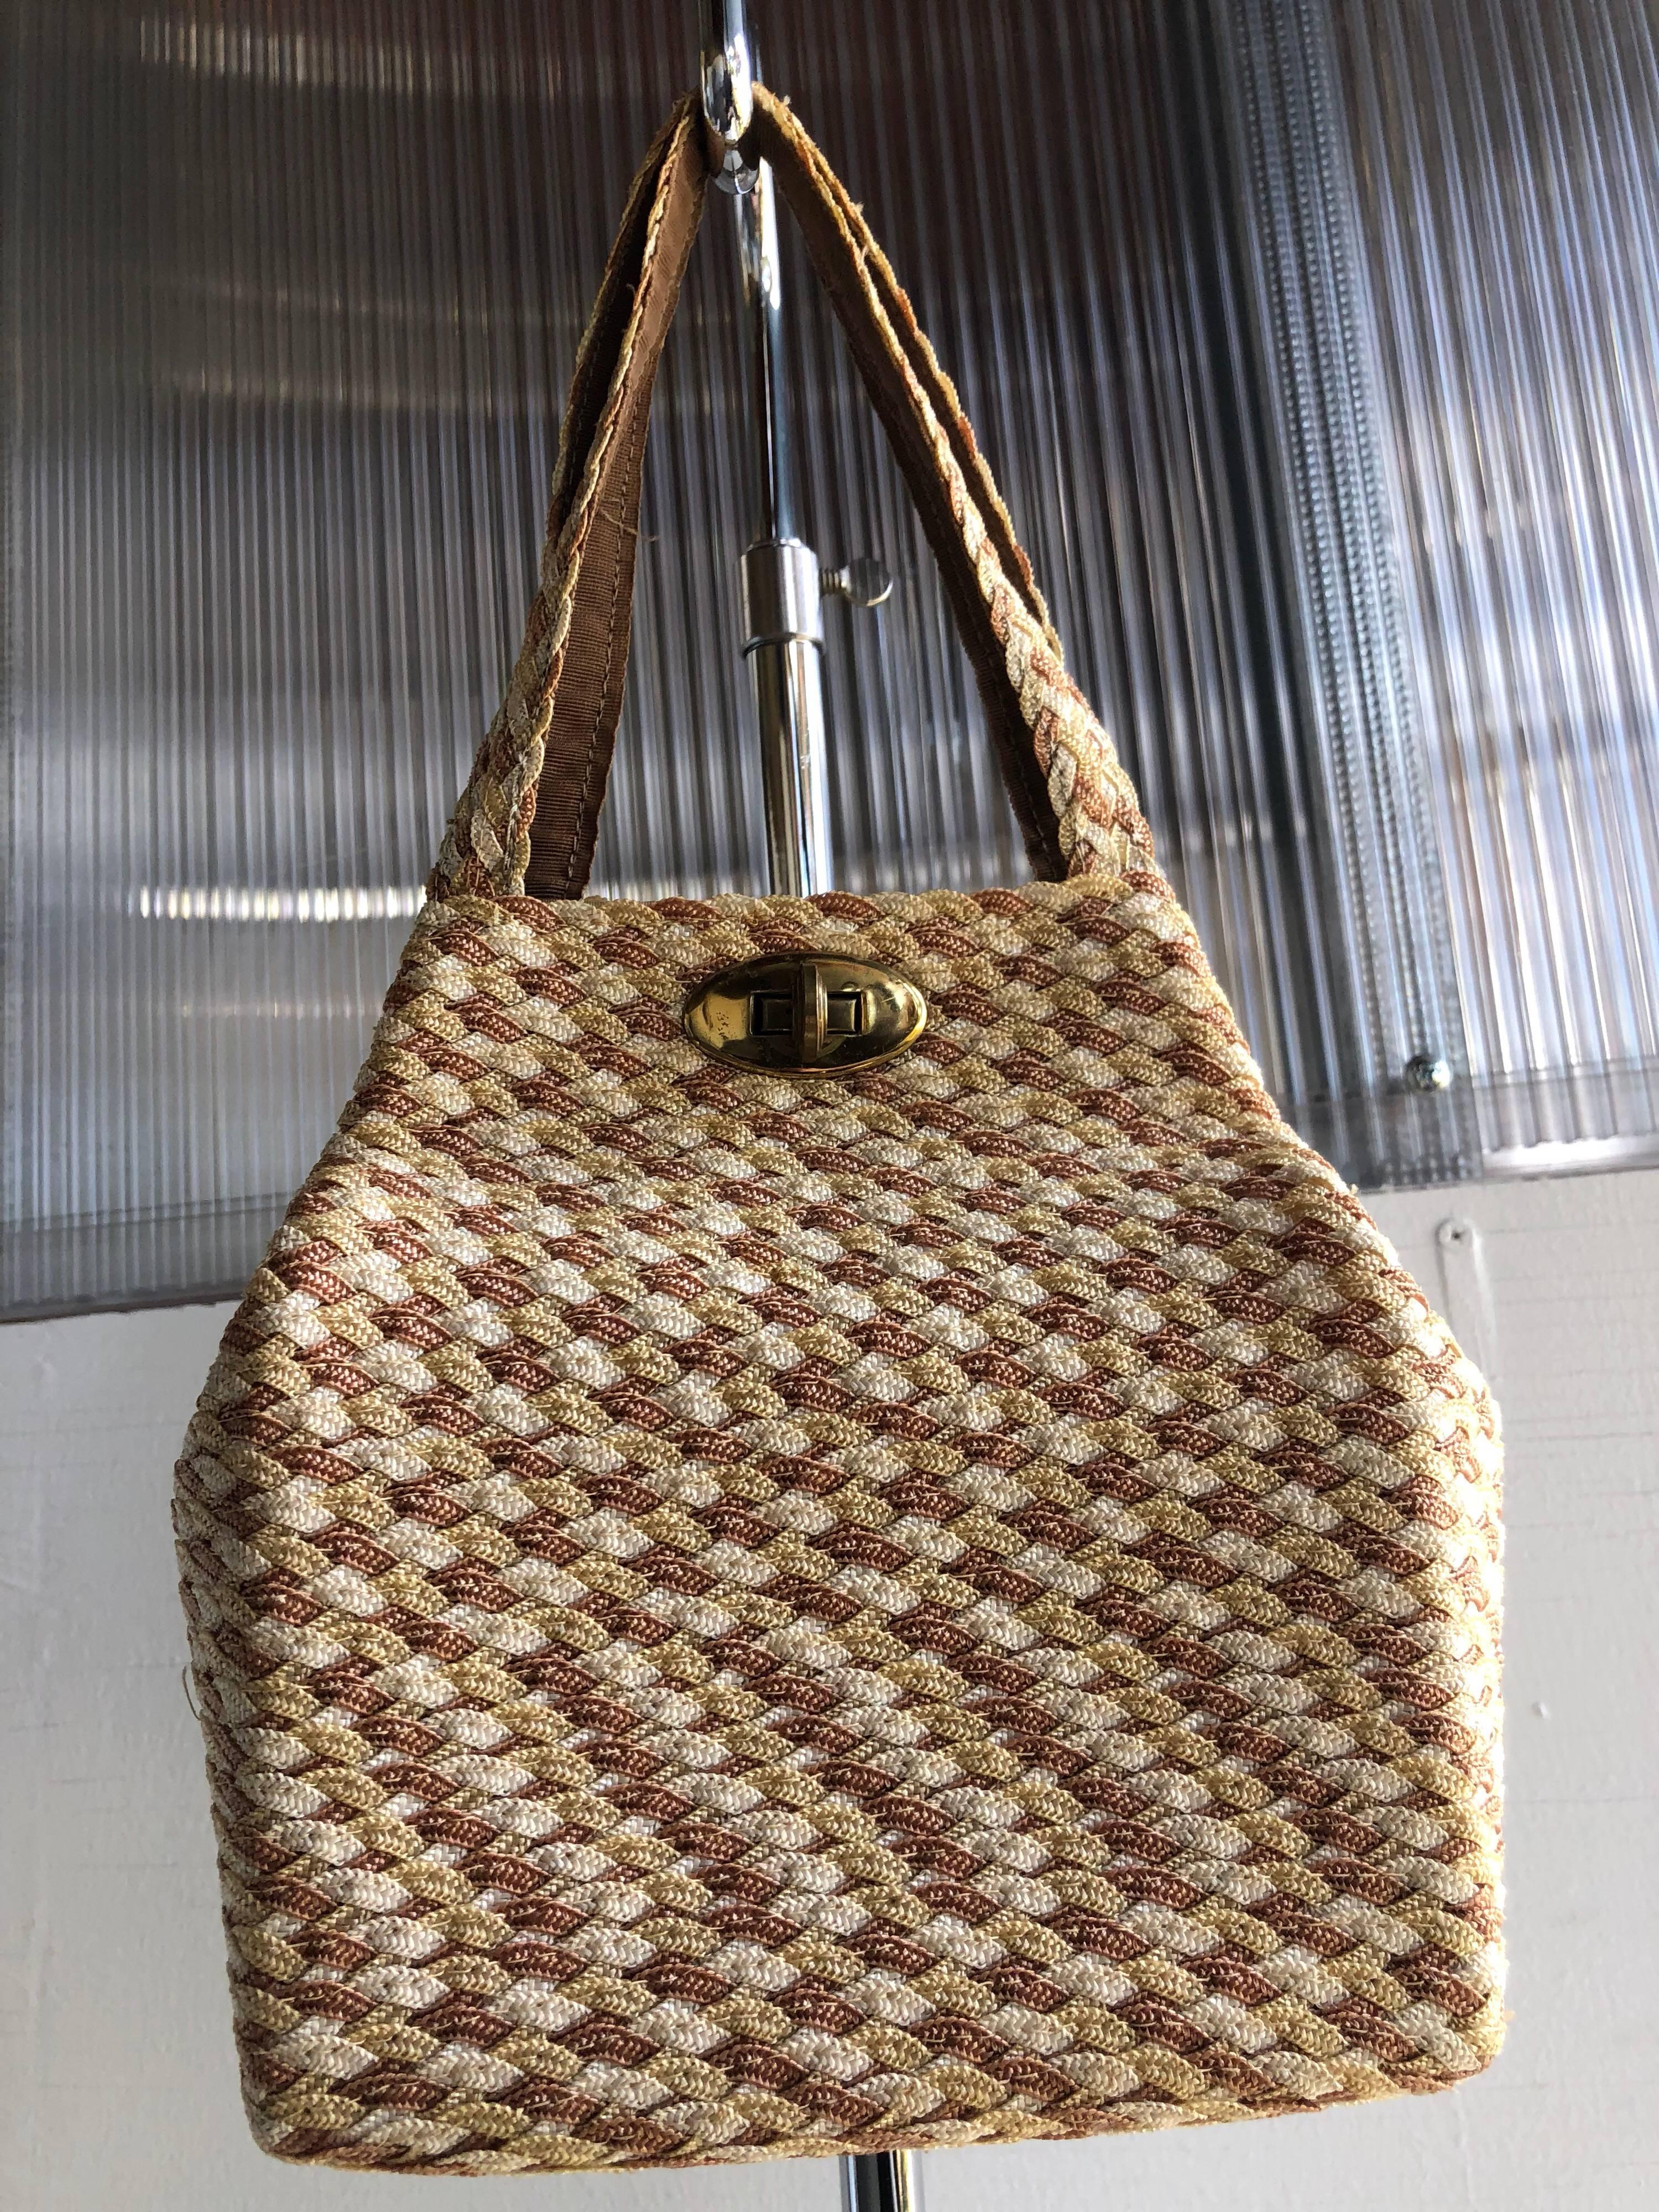 Tri-Tone Straw Woven Square Structured Handbag With Brass Toggle Closure, 1950s In Excellent Condition For Sale In Gresham, OR